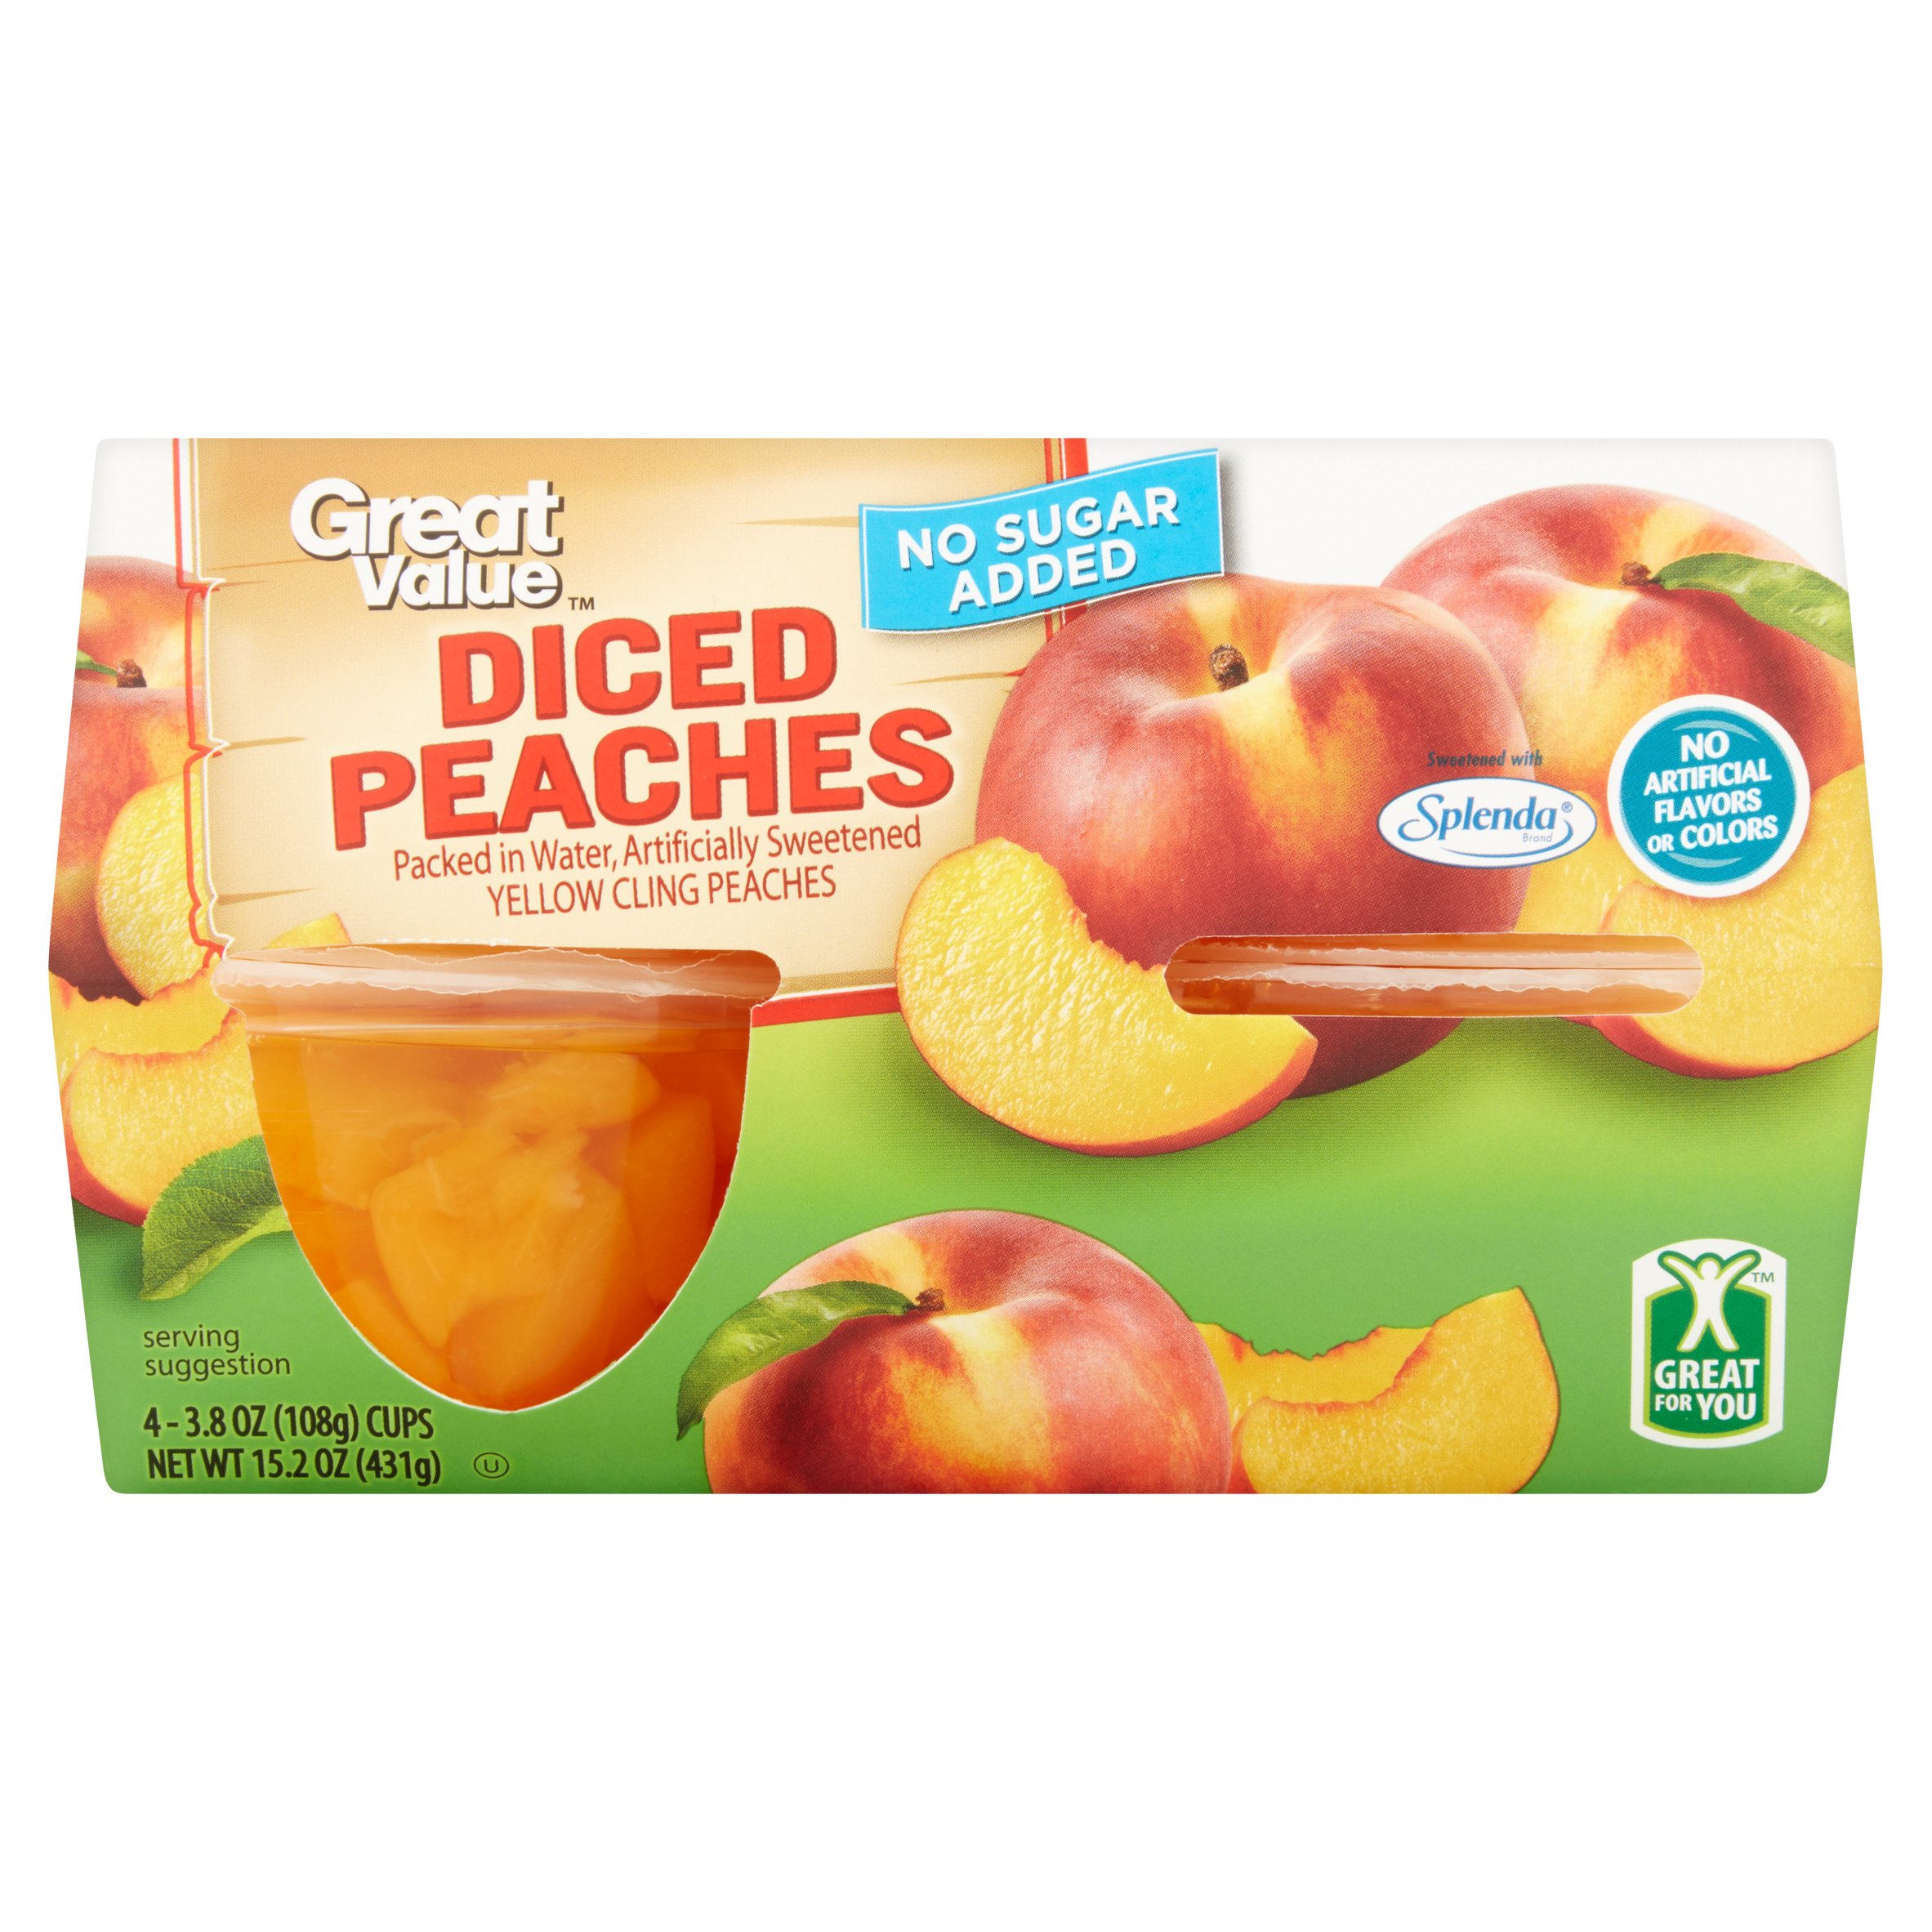 (4 Pack) Great Value Diced Peaches, No Sugar Added, 3.8 Oz, 4 Count Image